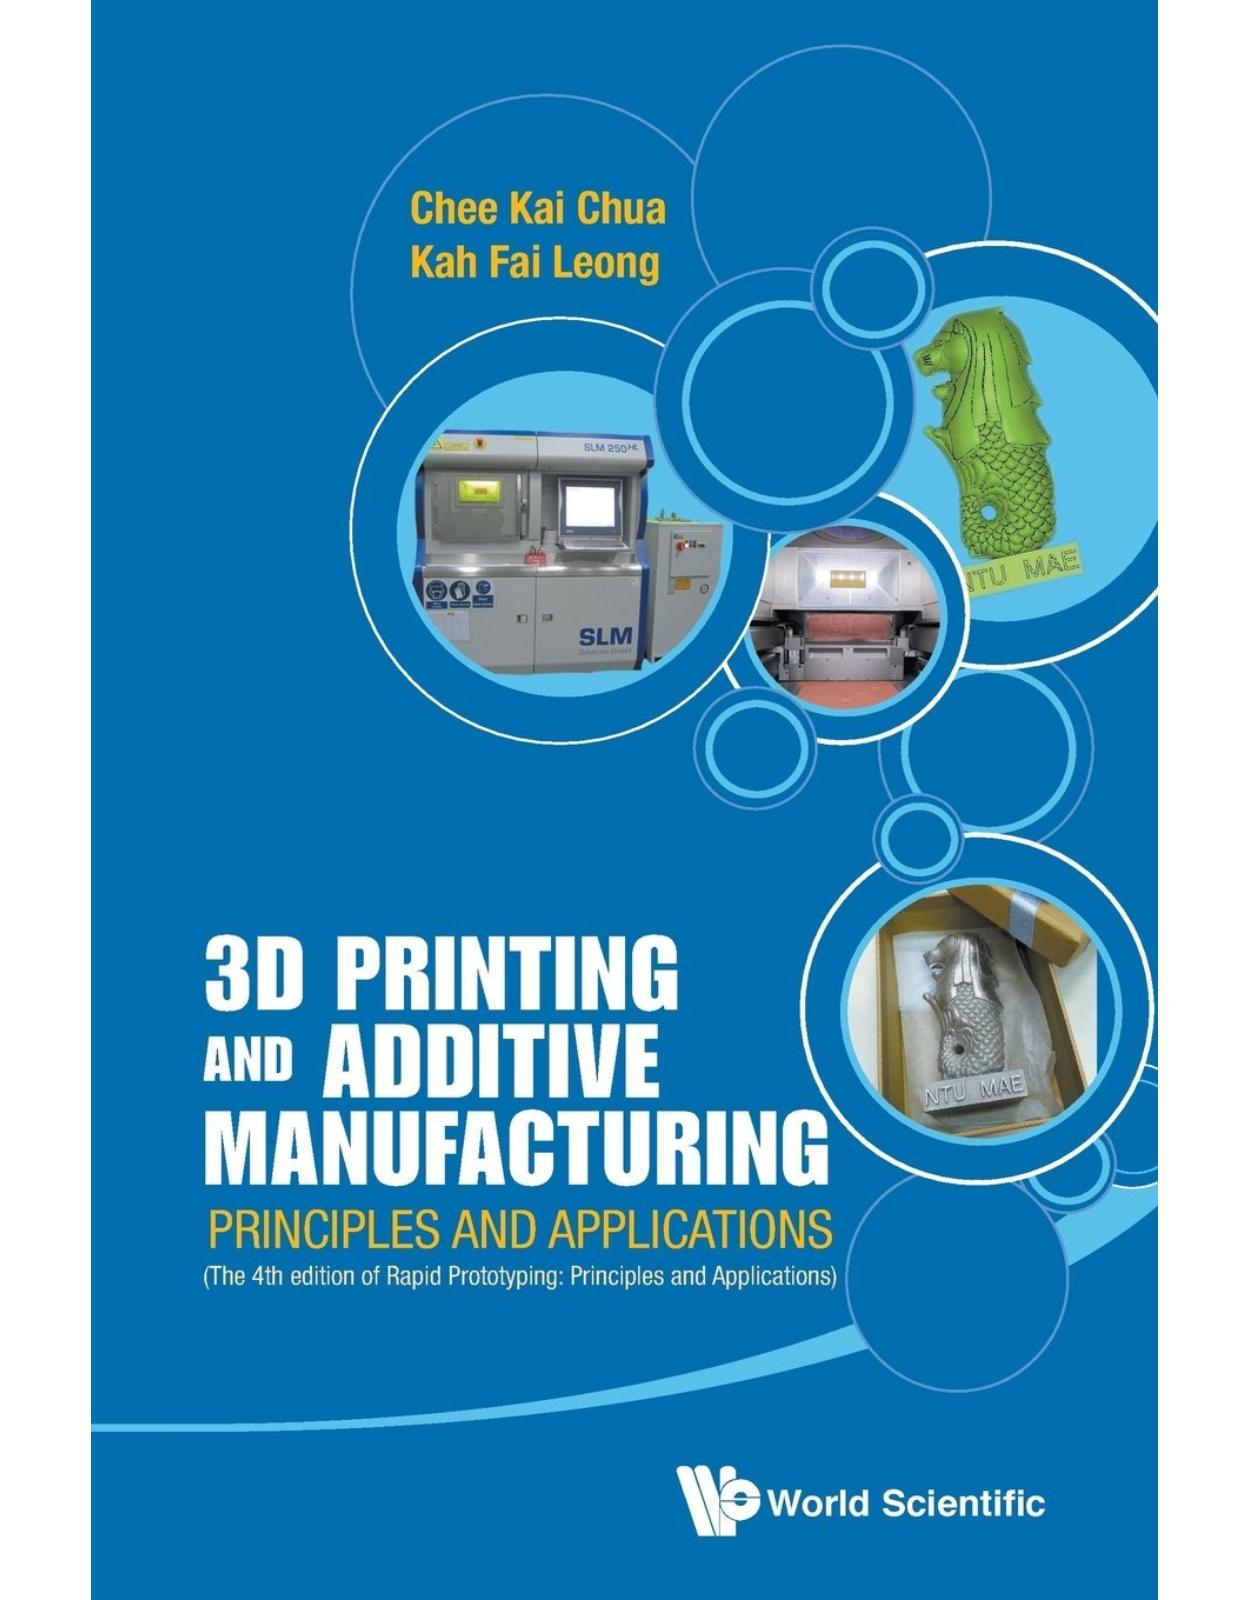 3D Printing And Additive Manufacturing: Principles And Applications (With Companion Media Pack) - Fourth Edition Of Rapid Prototyping